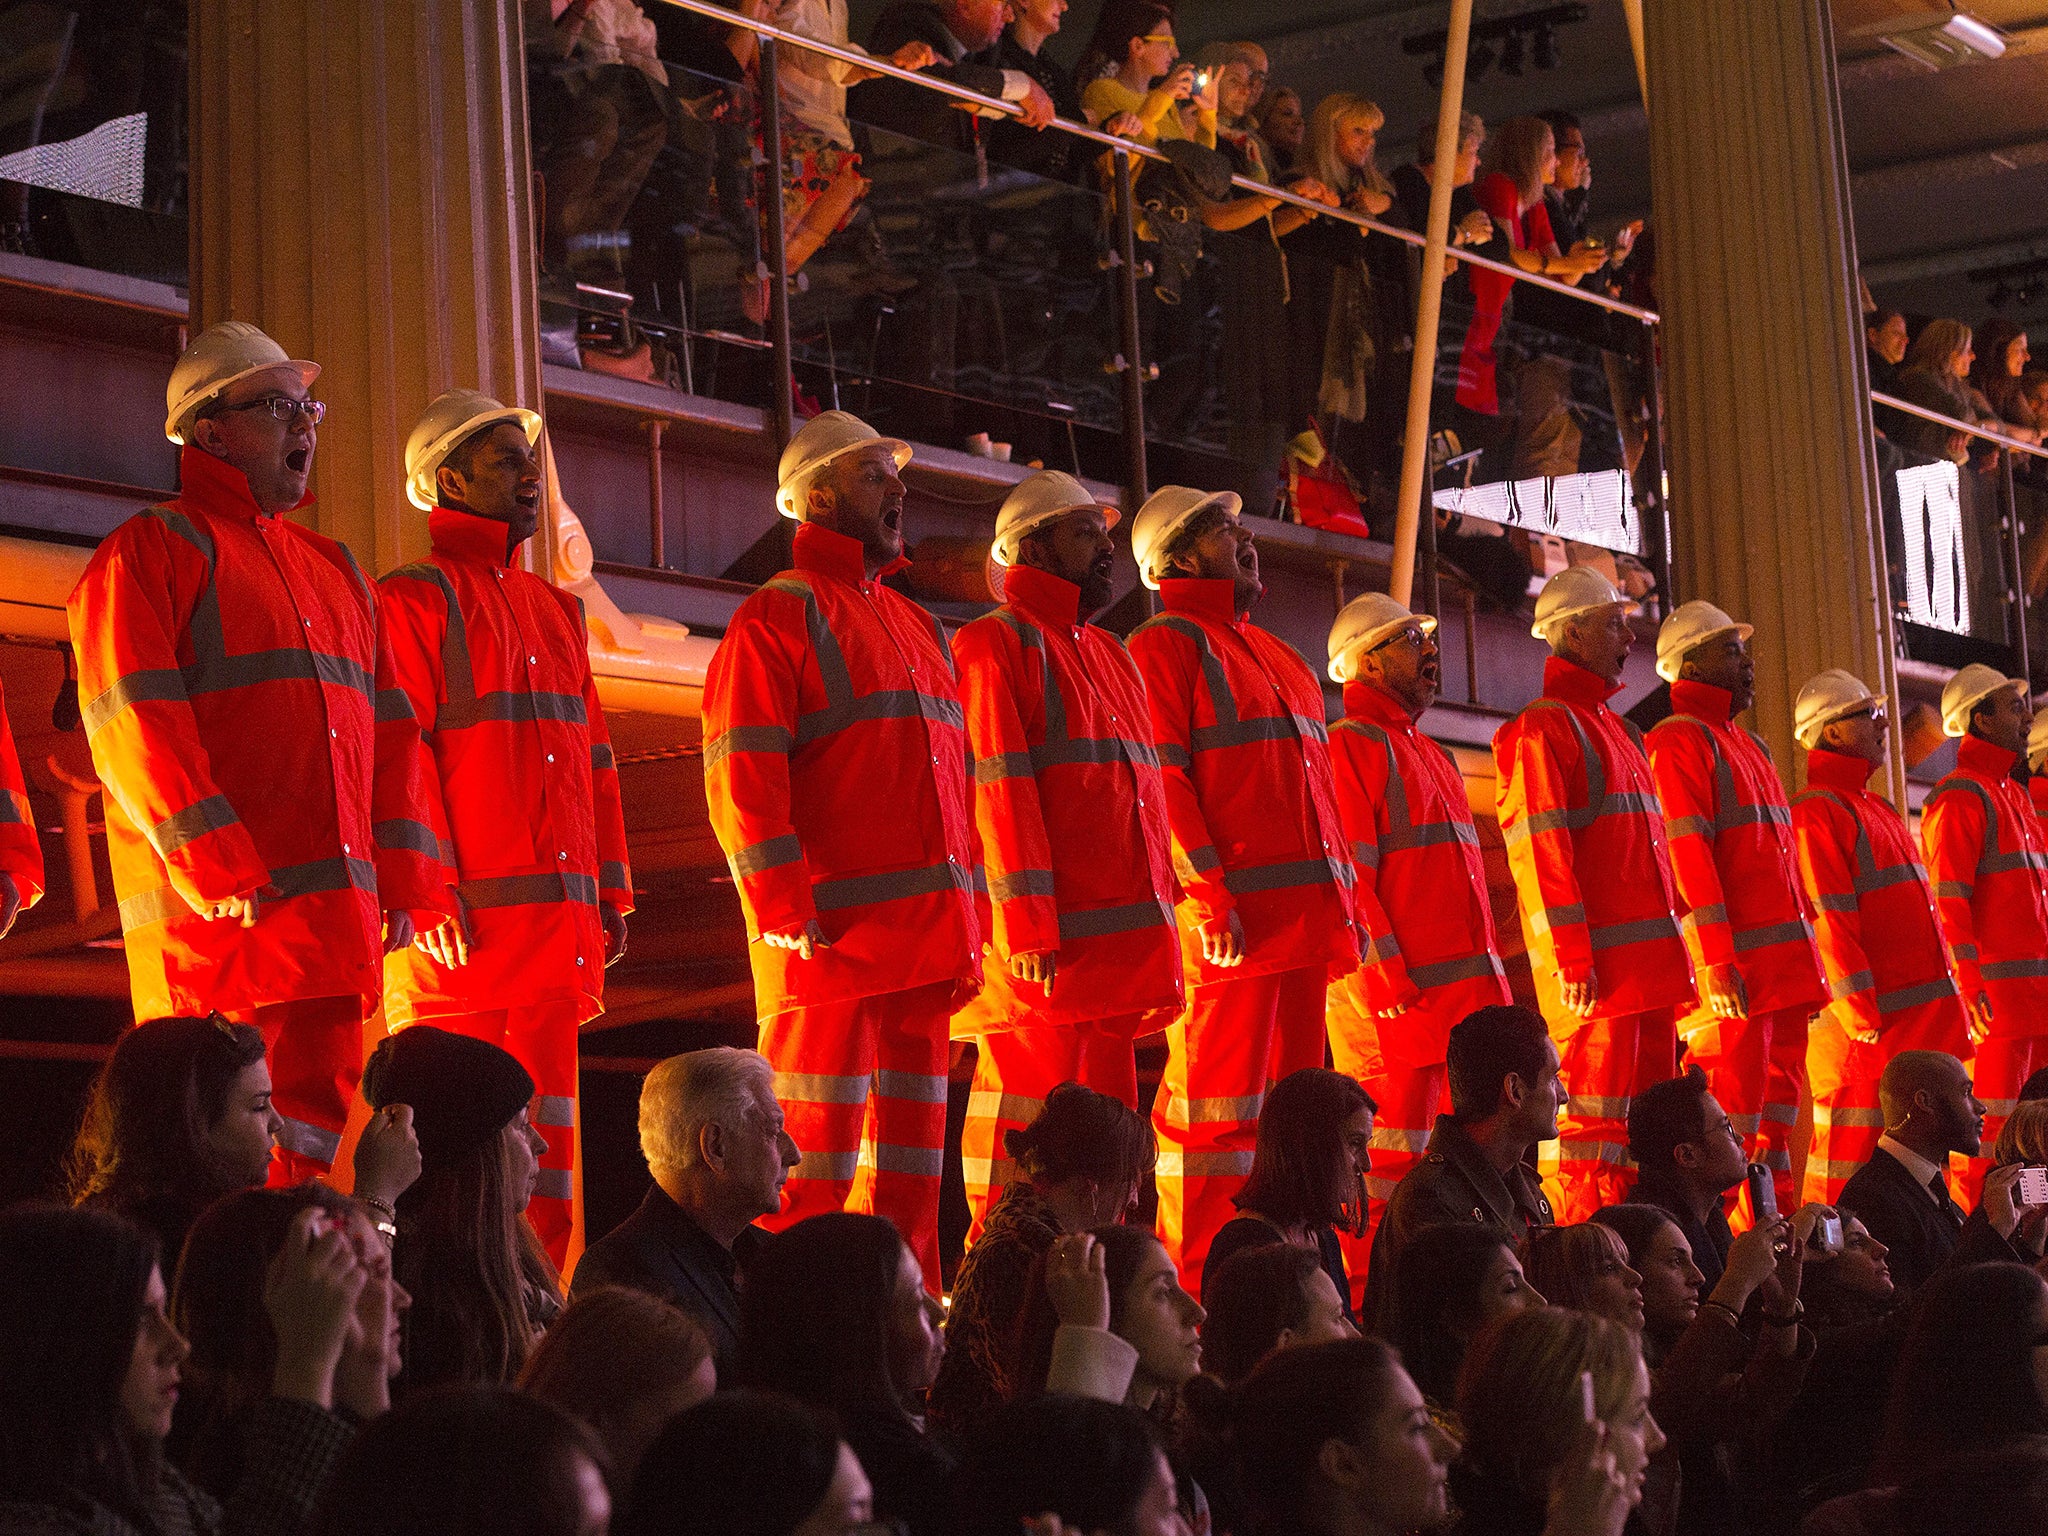 All male choirs are perhaps a “way to get men together in a different sense”